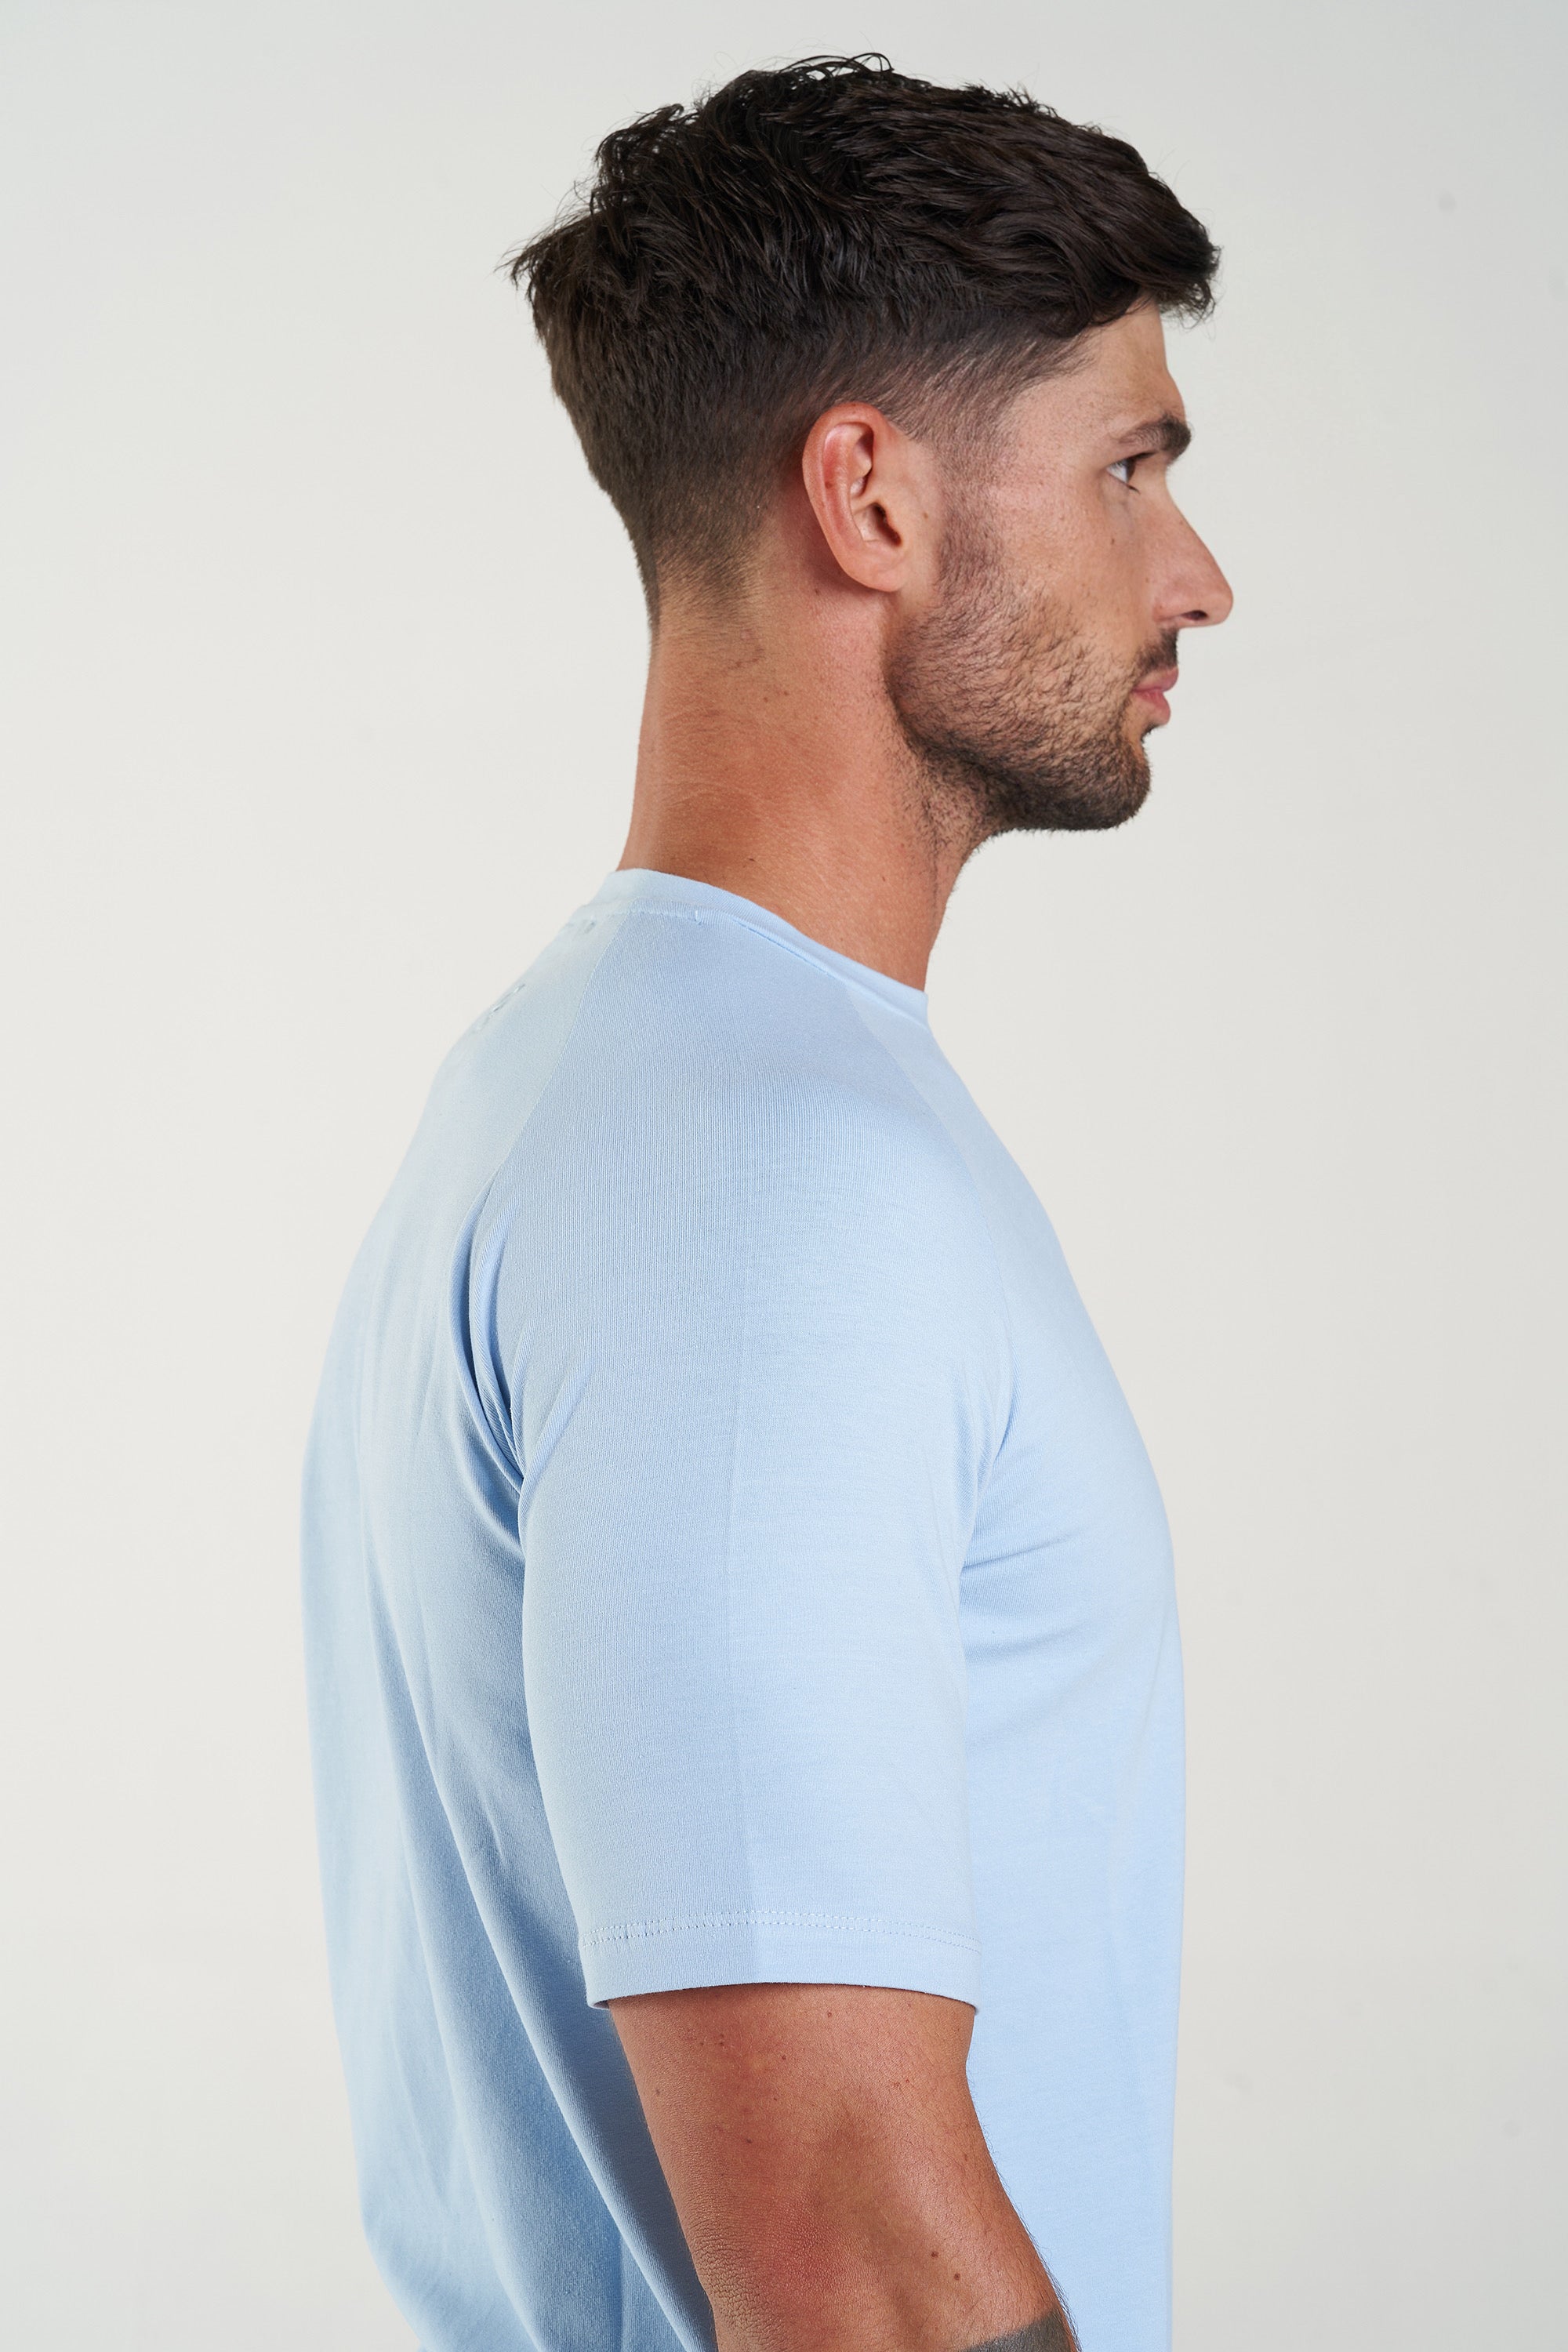 THE MUSCLE BASIC T-SHIRT - LIGHT BLUE - ICON. AMSTERDAM